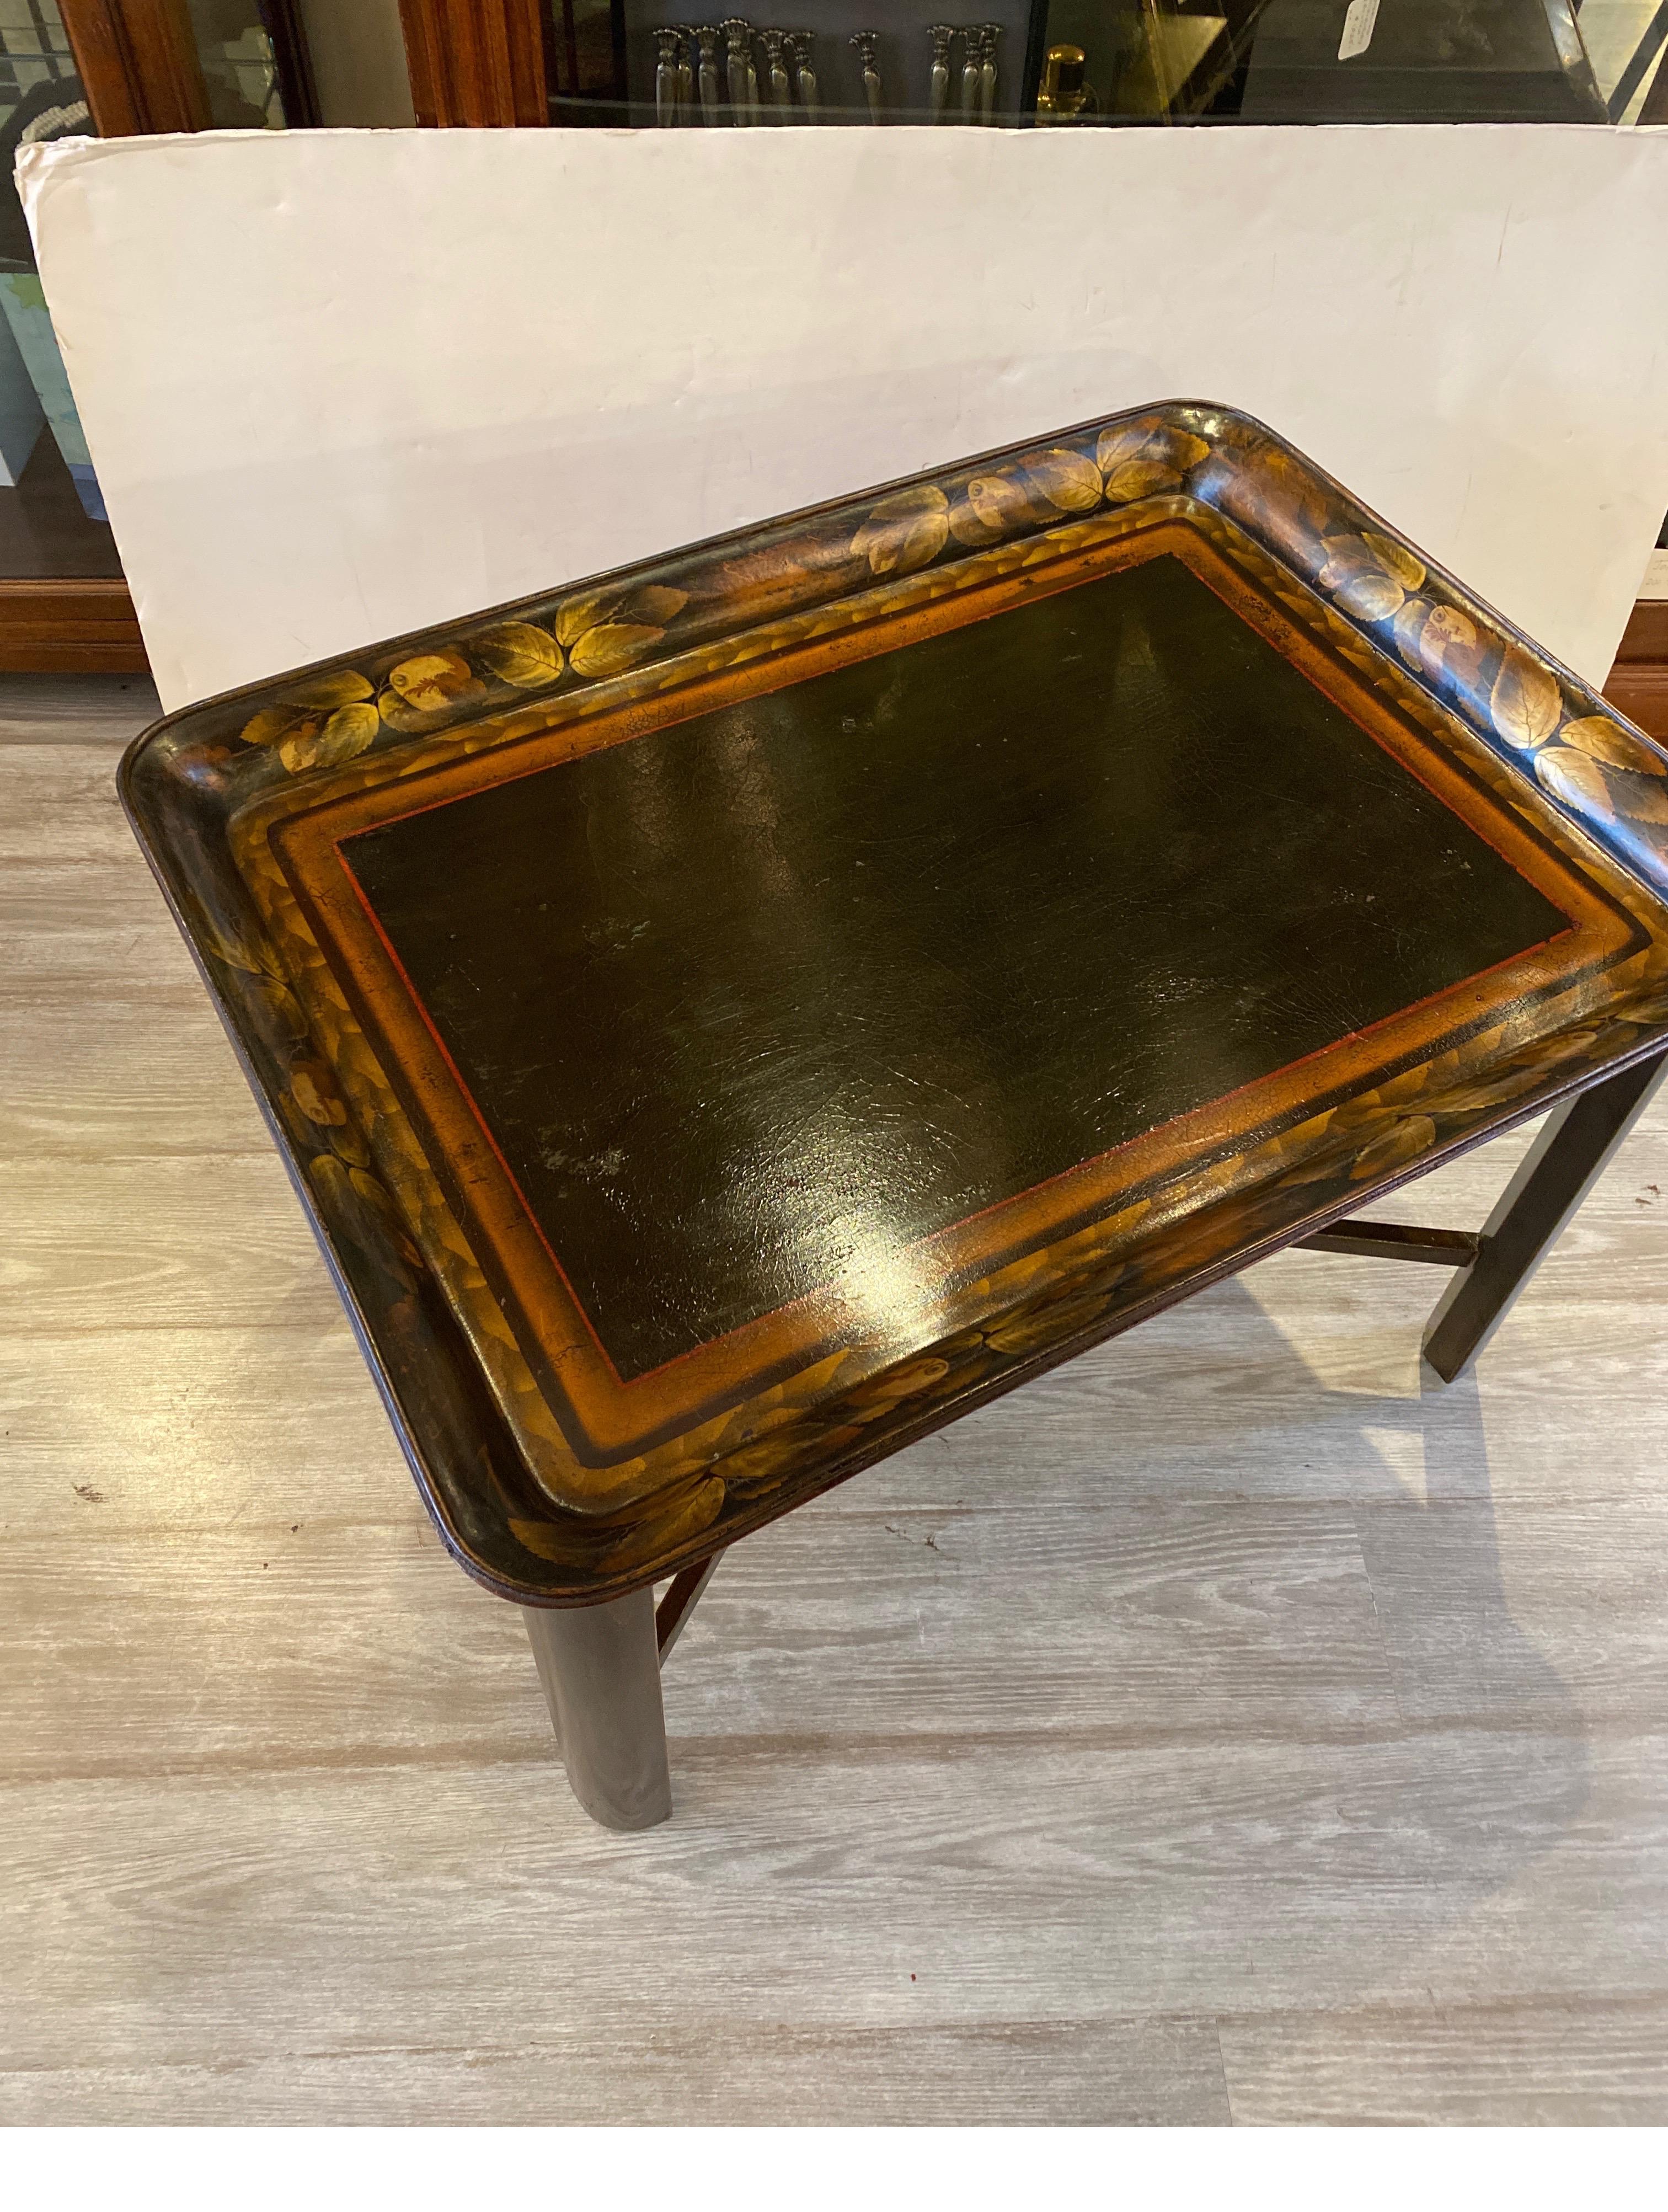 A circa 1870's Papier Mache had gilt and decorated tray with a later custom dark wood base. The tray table with the tray fitting into the custom base. Can be removed and used for serving.